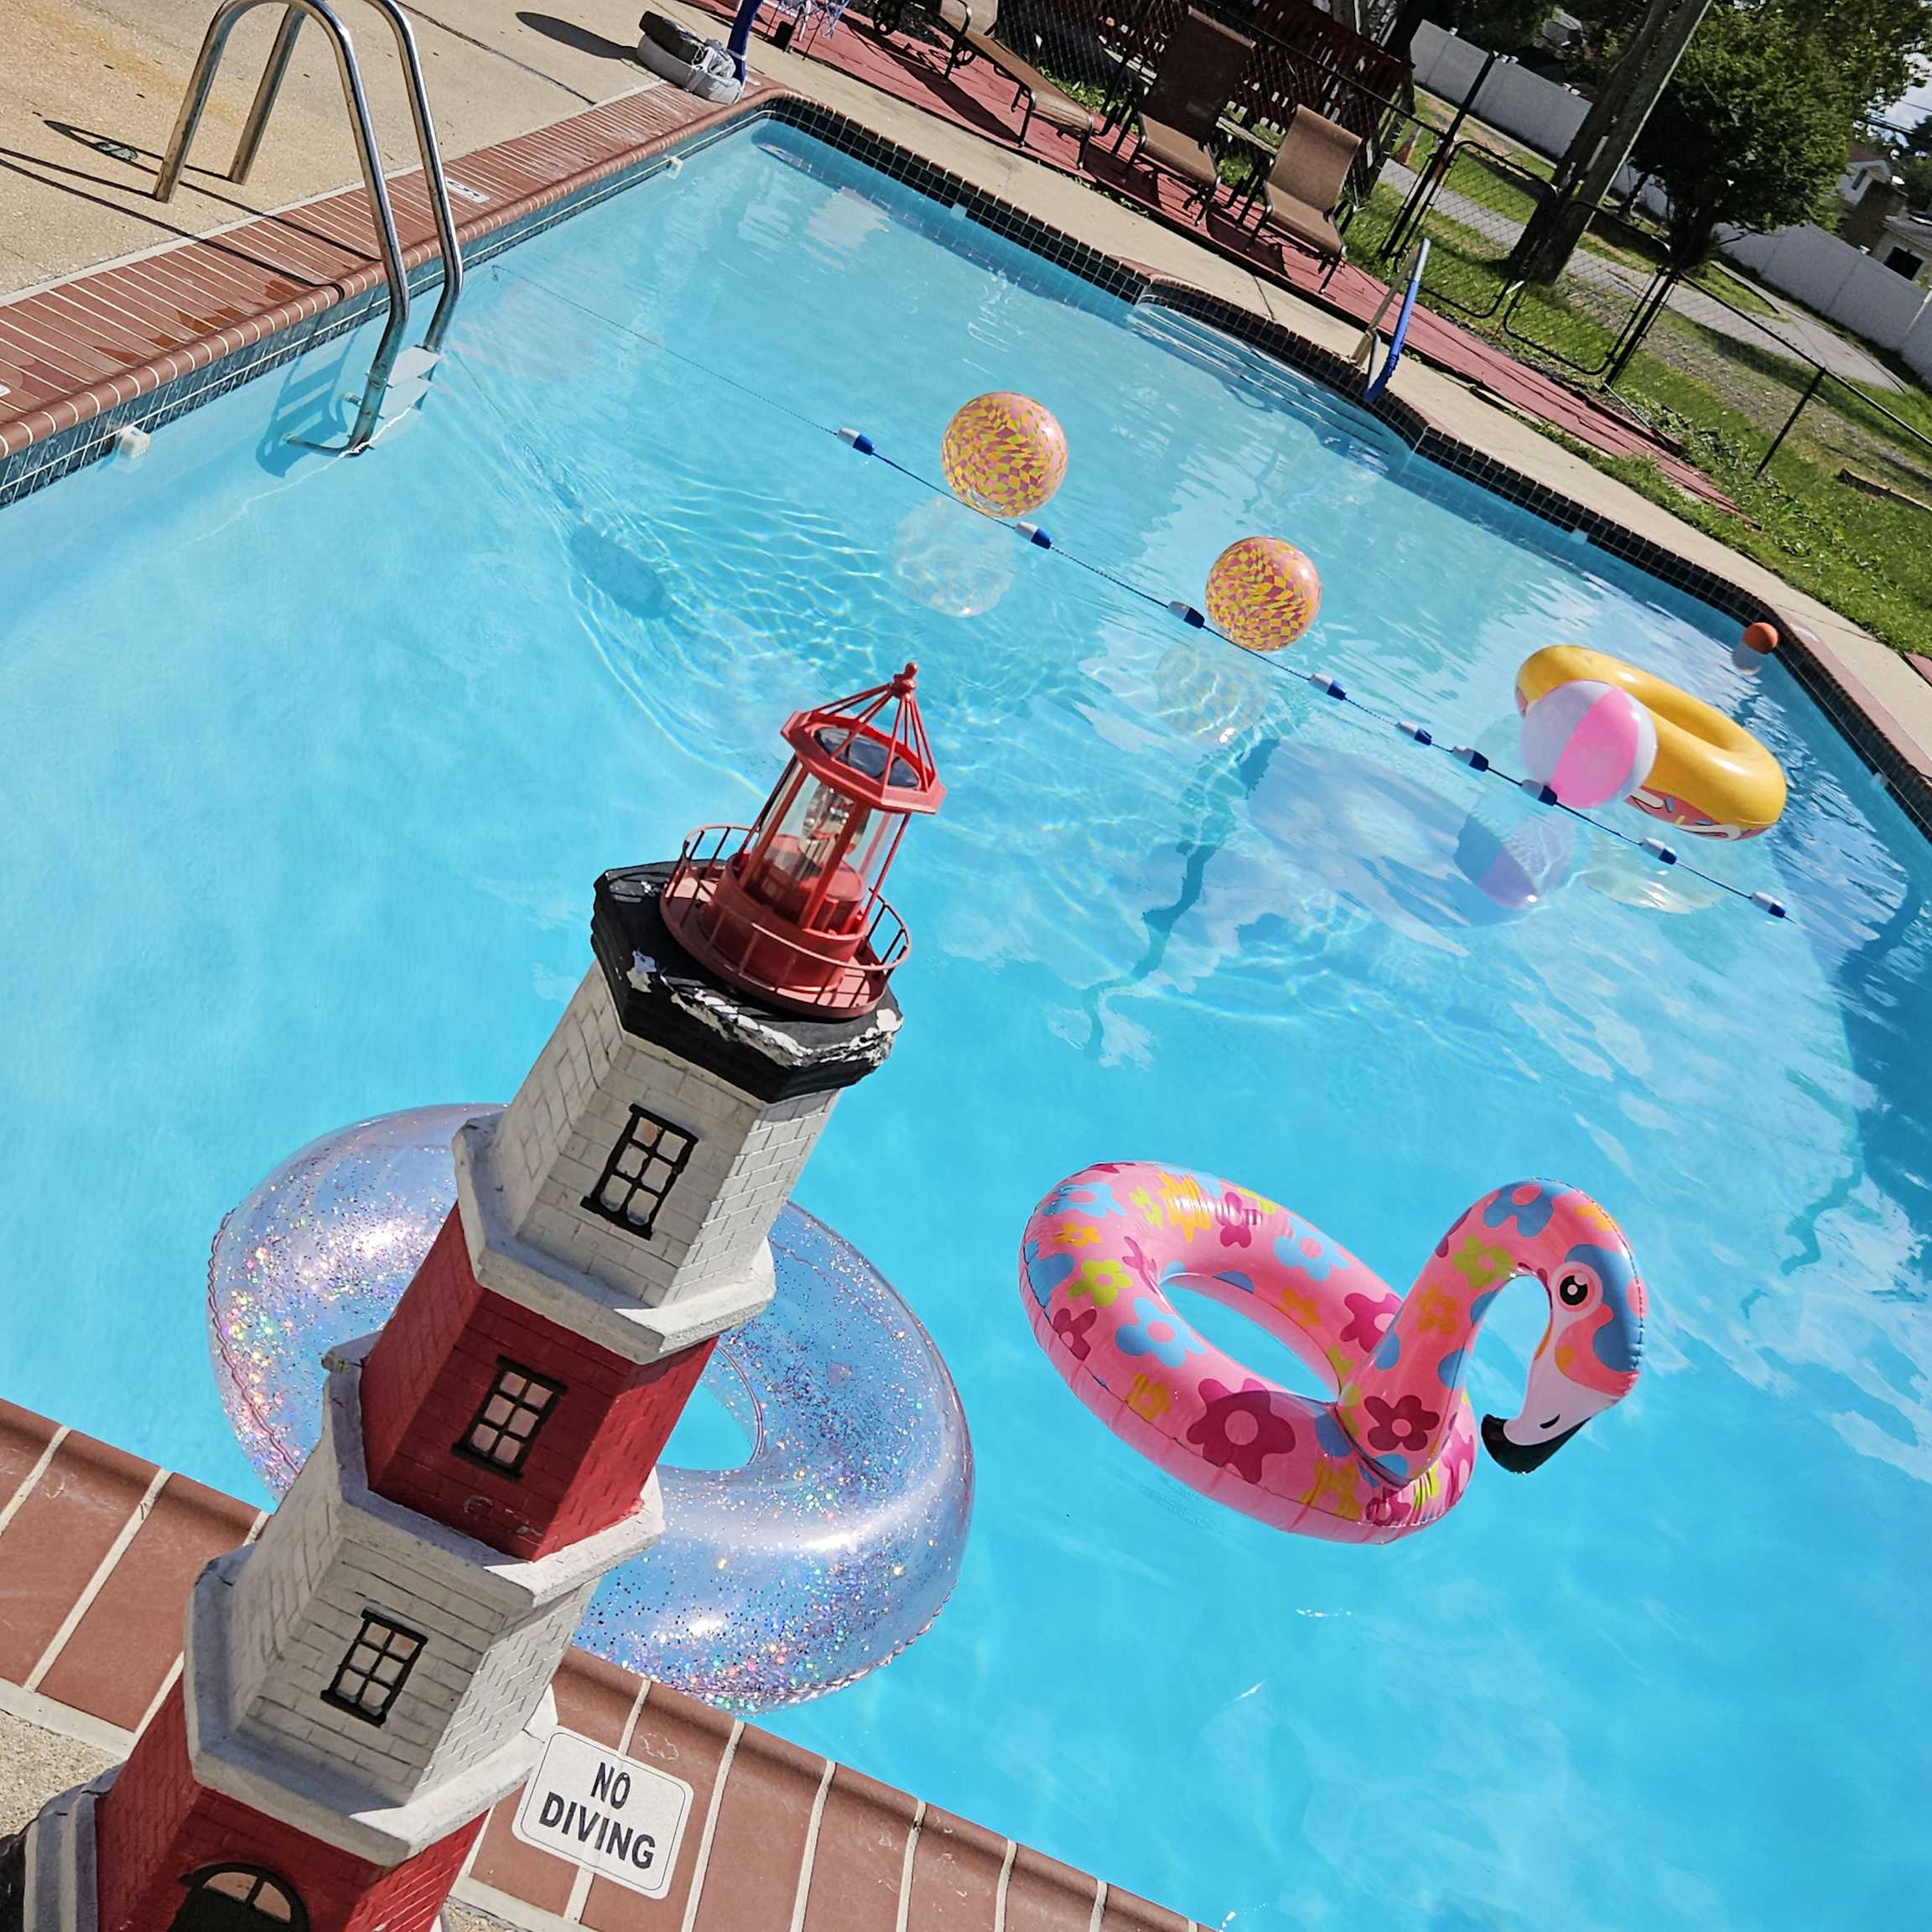 Swimply - Rent Private Pools, Courts, and More by the Hour - Pools Near Me